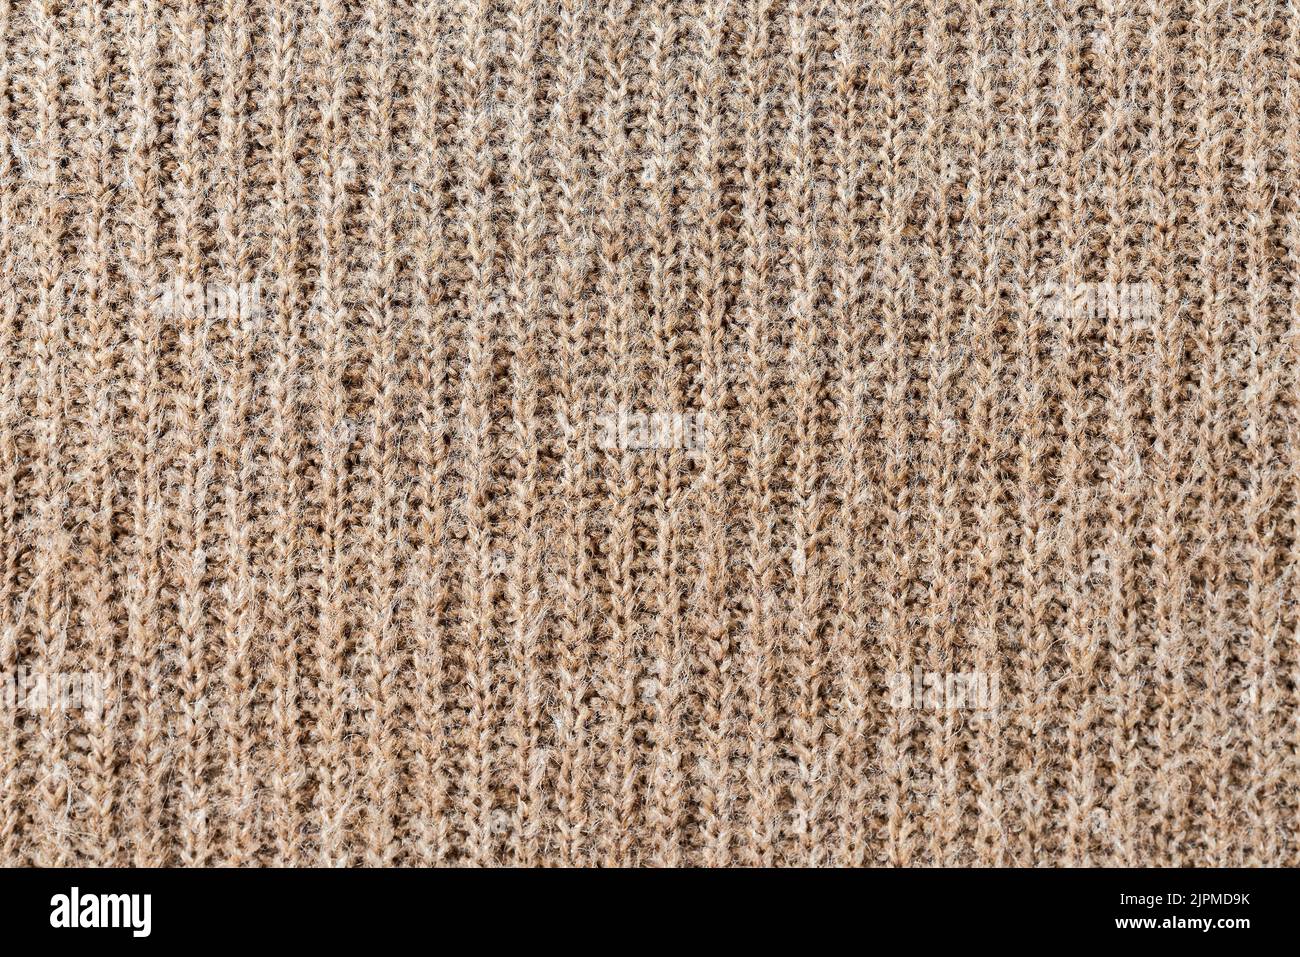 close-up view of wool knit fabric background Stock Photo